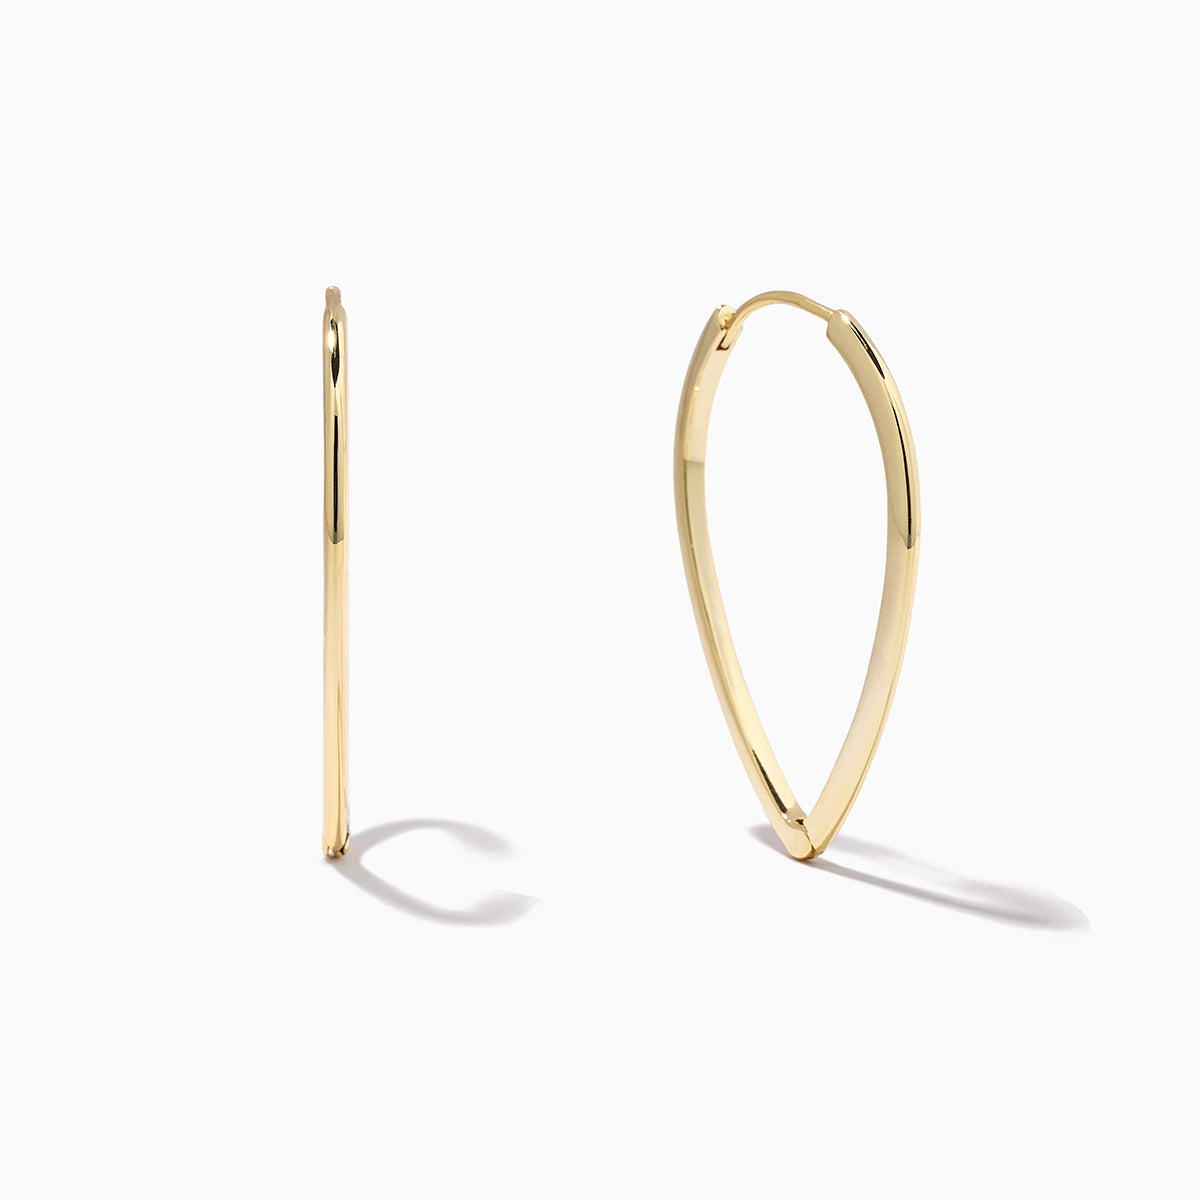 Unique Design Gold Filled Smooth Hoop Earrings For Women Big